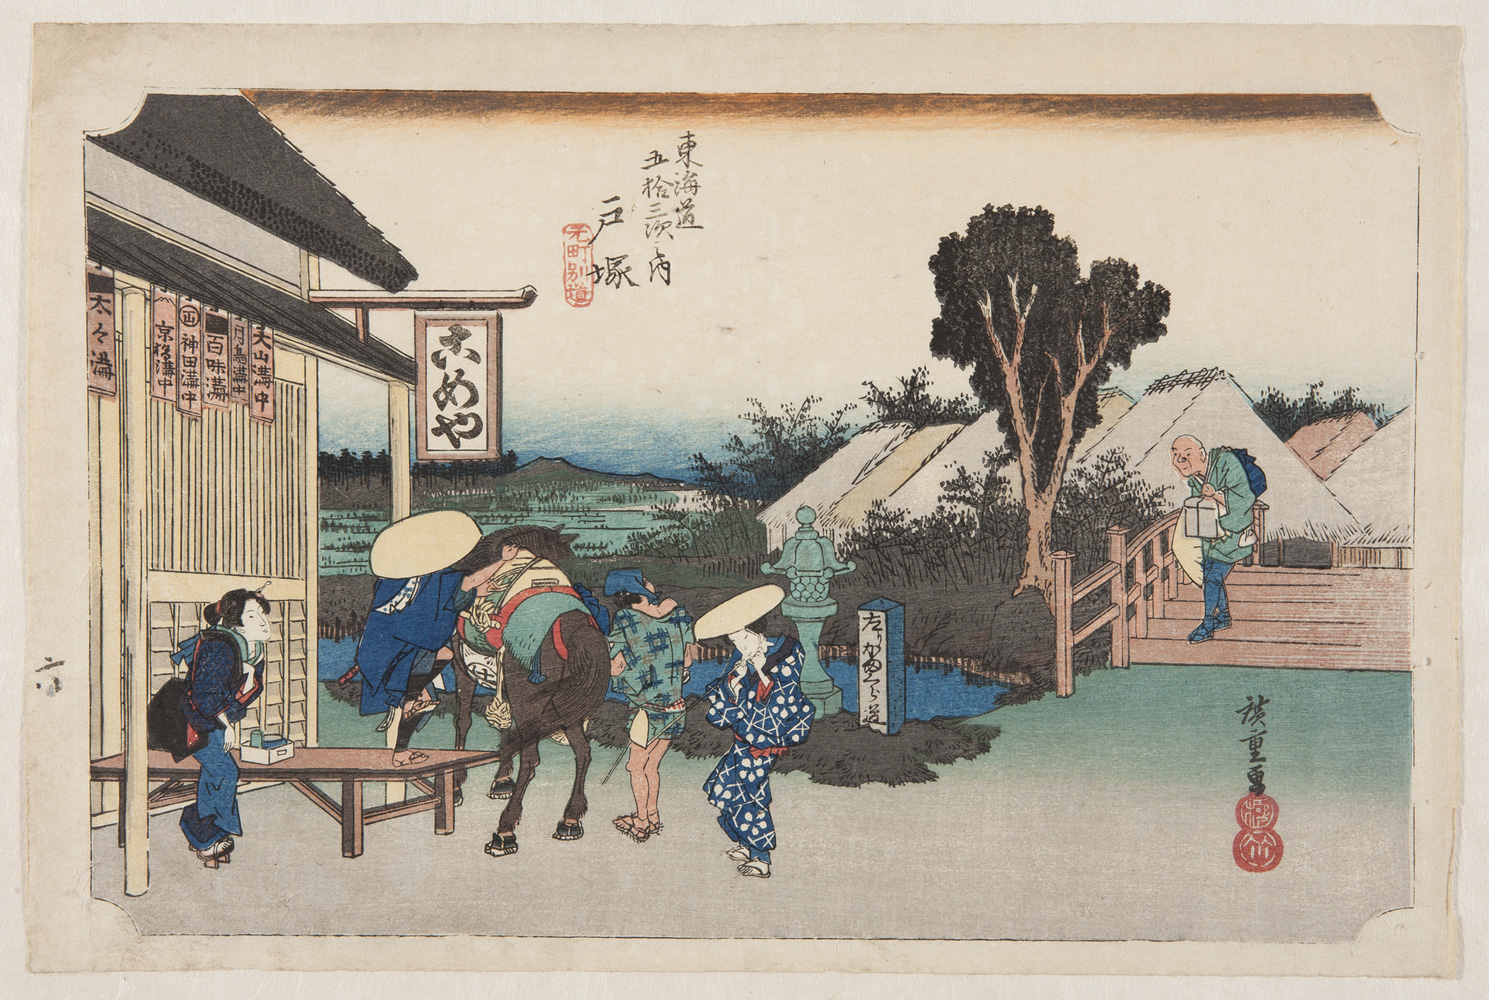 Japanese print of travellers outside an inn. A man, foot in stirrup, prepares to mount a horse, an attendant stands at the side. Two women in elaborate traditional dress look on. A man carrying a box walks down the steps towards the group. In the background are more buildings and countryside beyond.